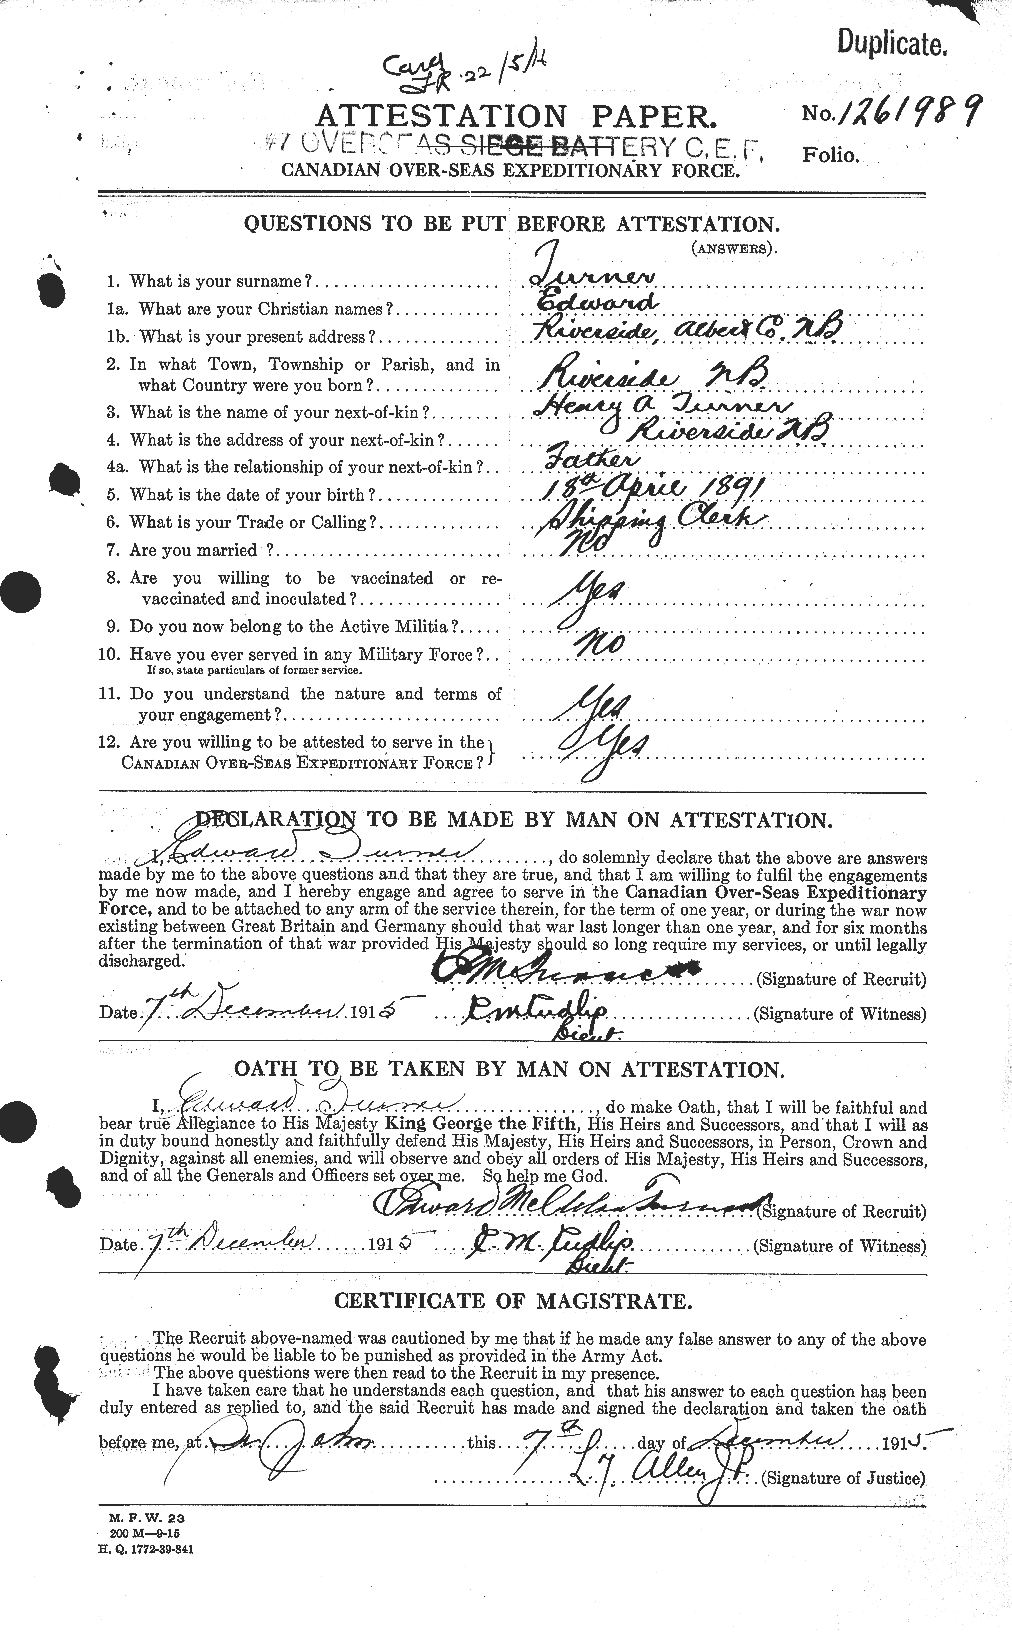 Personnel Records of the First World War - CEF 648381a